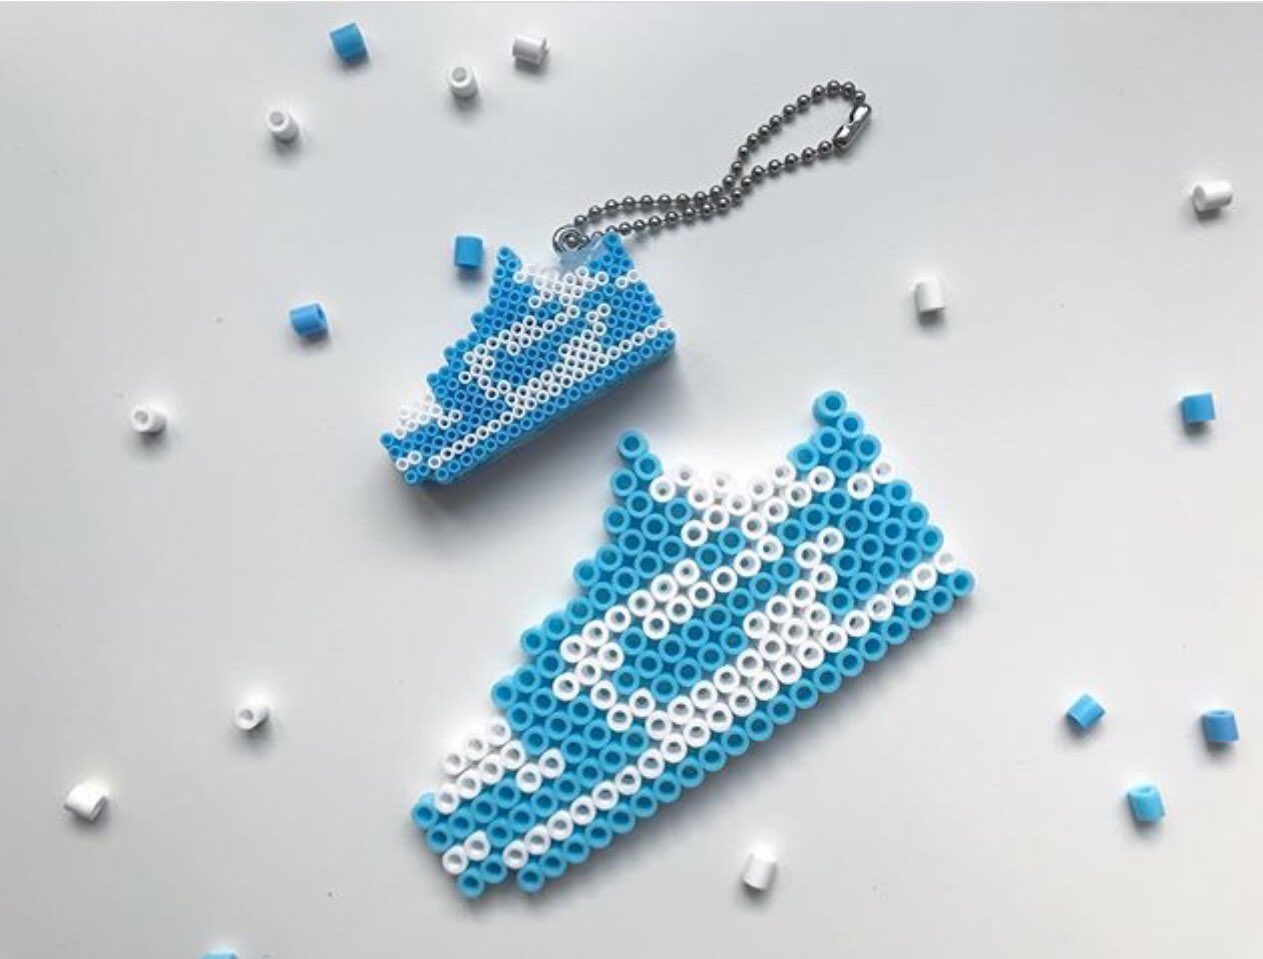 Hama Beads on Twitter: "Oh my! We are losing it over the trainers/sneakers/kicks (depending where you're from 🌏) that @naniekicks produces with those 3D #minibeads #nikes 😍 Happy #ShareYourWorkWednesday #